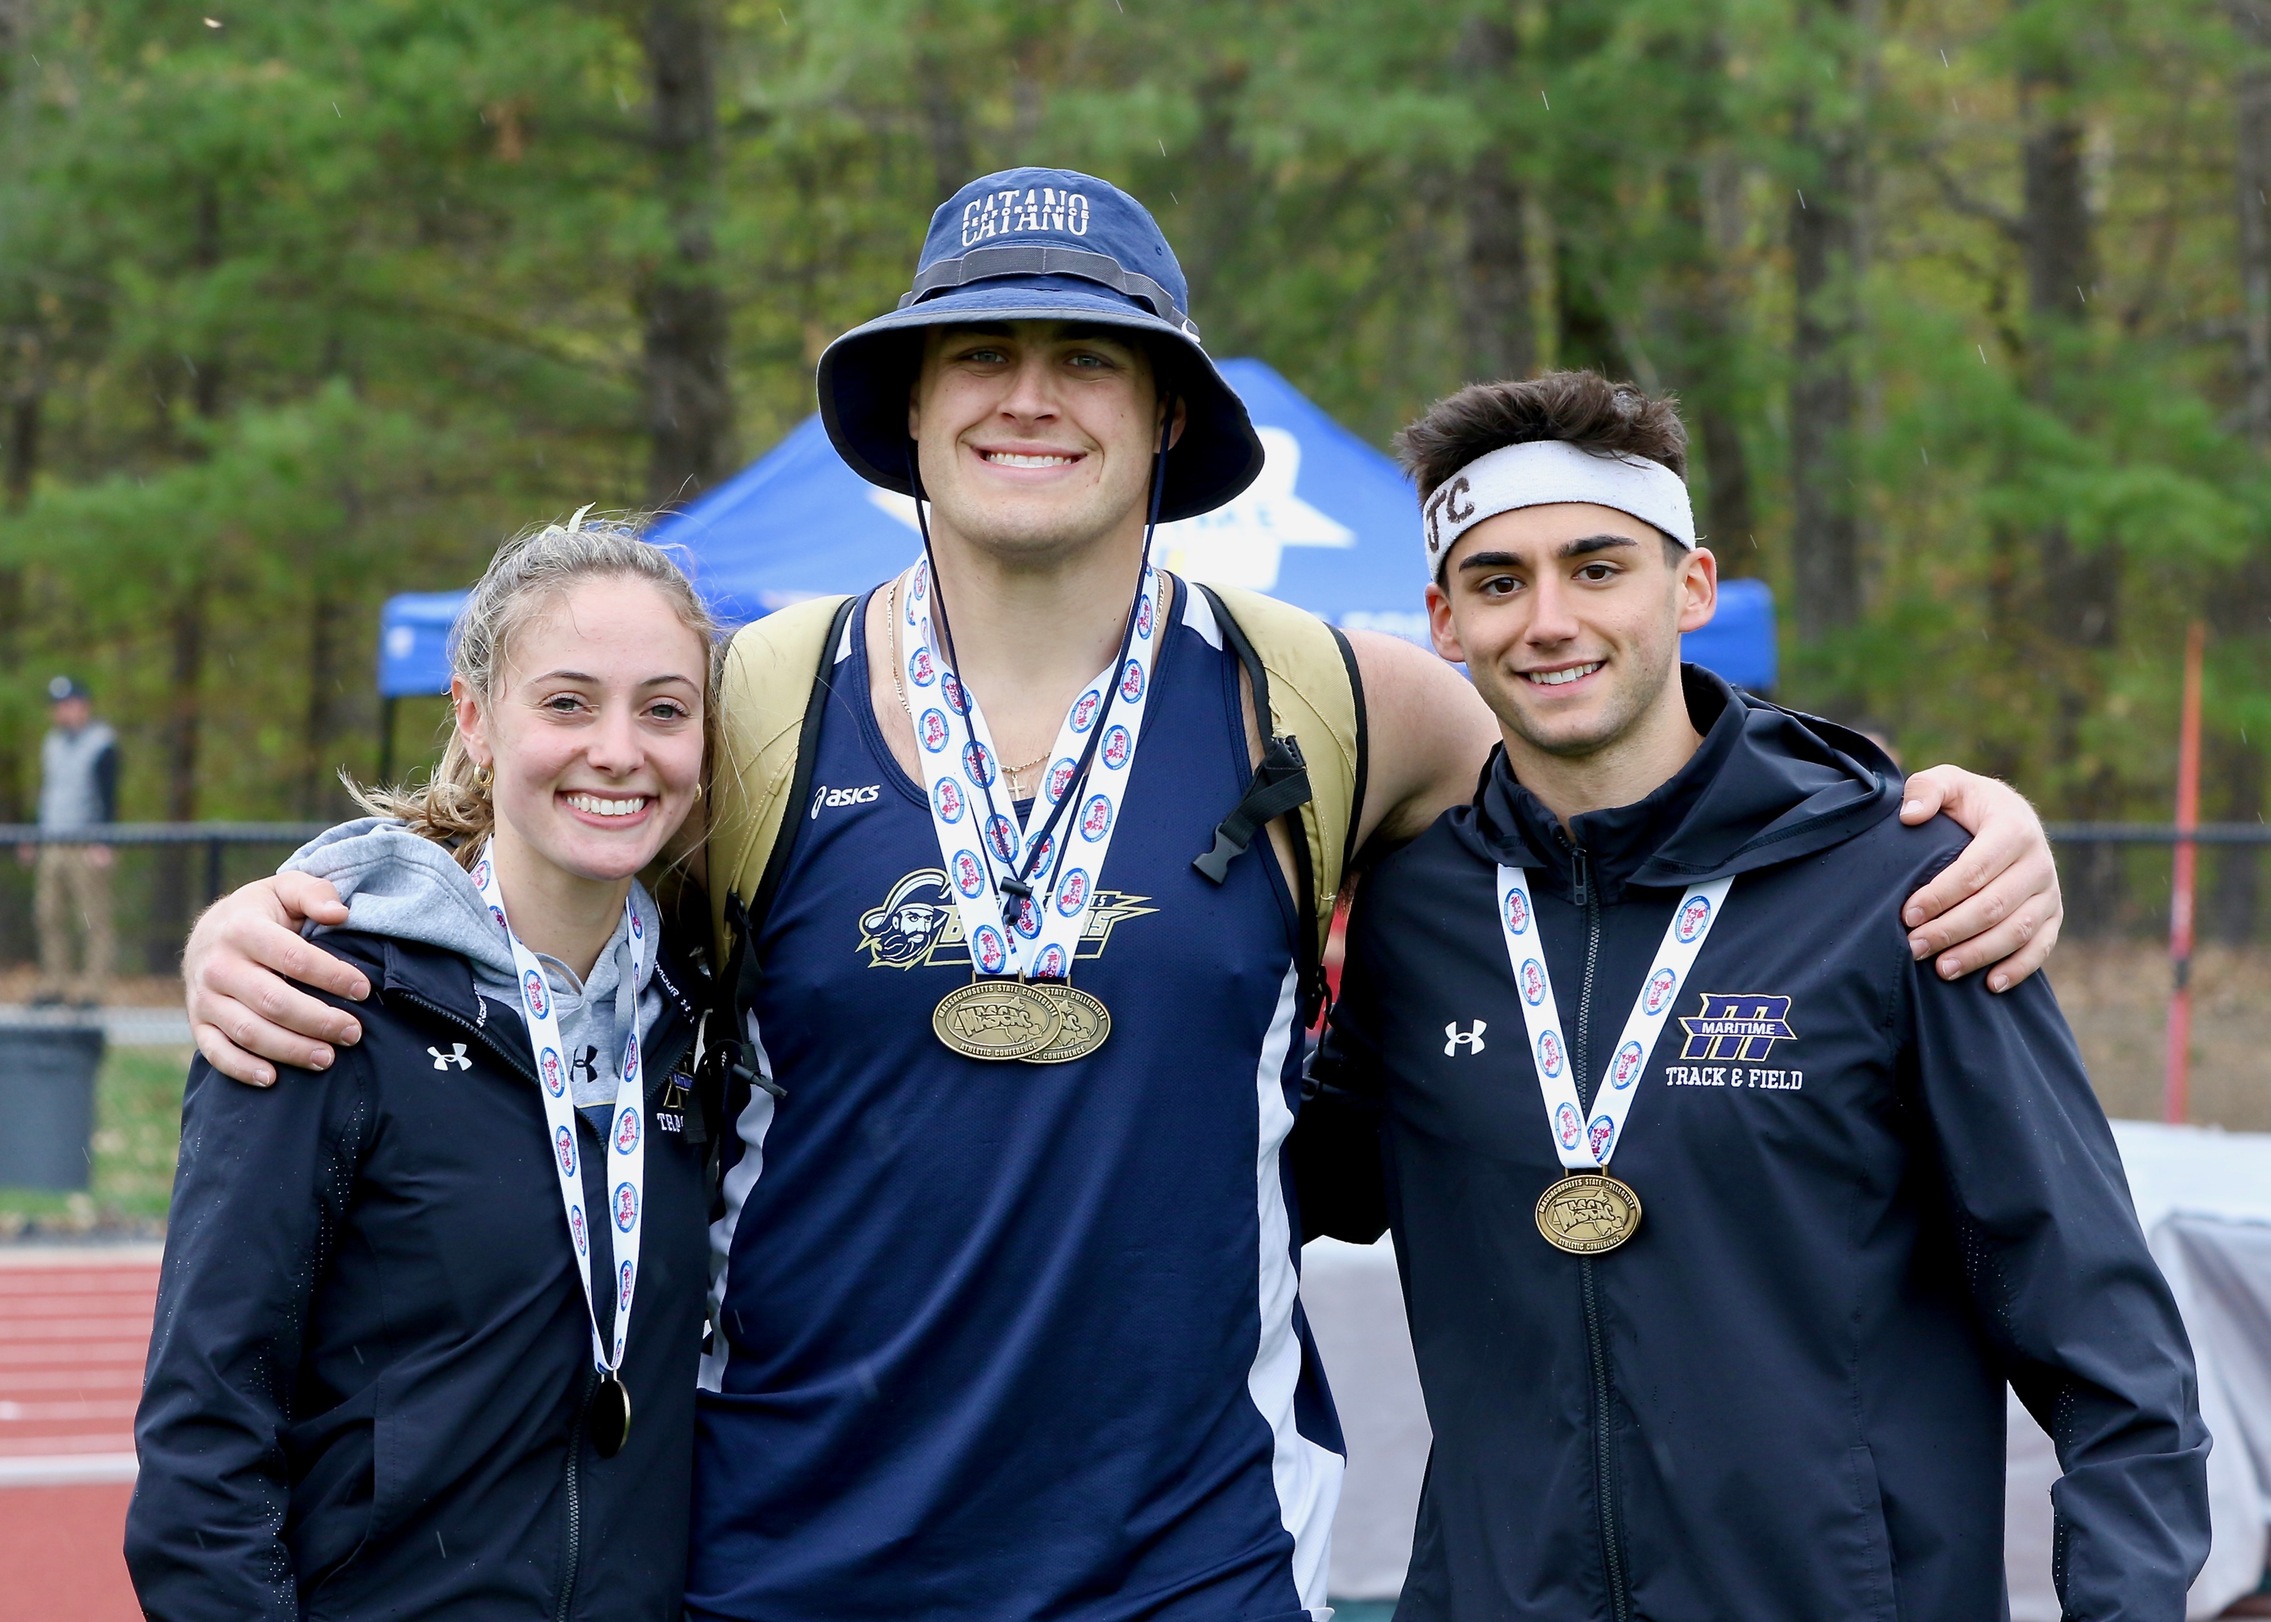 Childs, Grieco and Rousseau Make Program History at MASCAC Championships